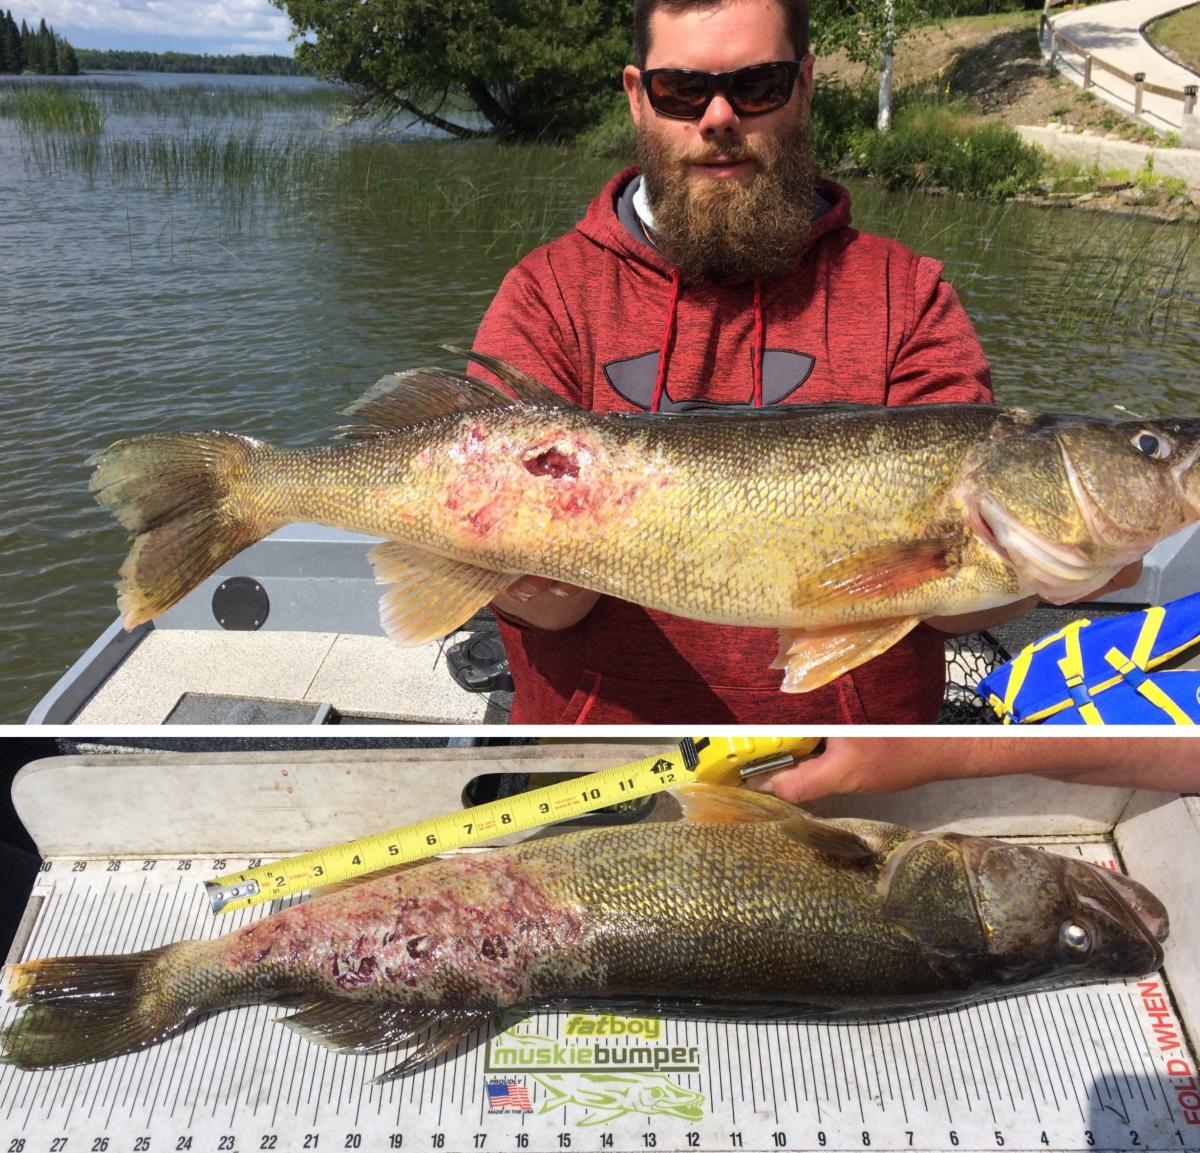 How To Guide on Leadcore Trolling for Late Summer Walleye - Fish Ed 